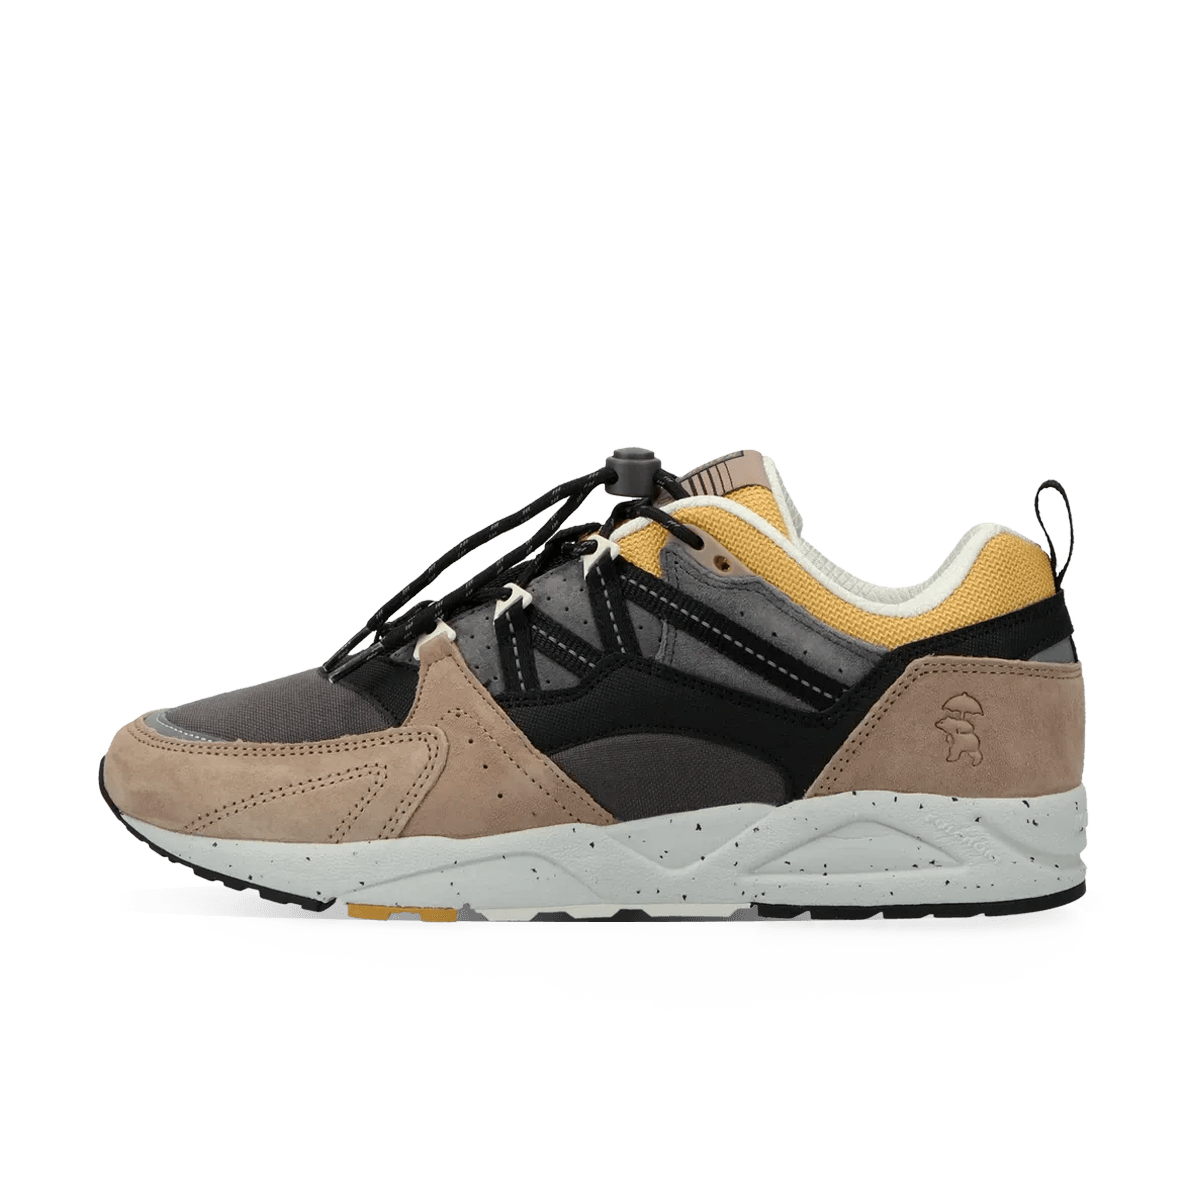 Knirps x Karhu Fusion 2.0 'Silver Mink' -  Shitty Weather Pack